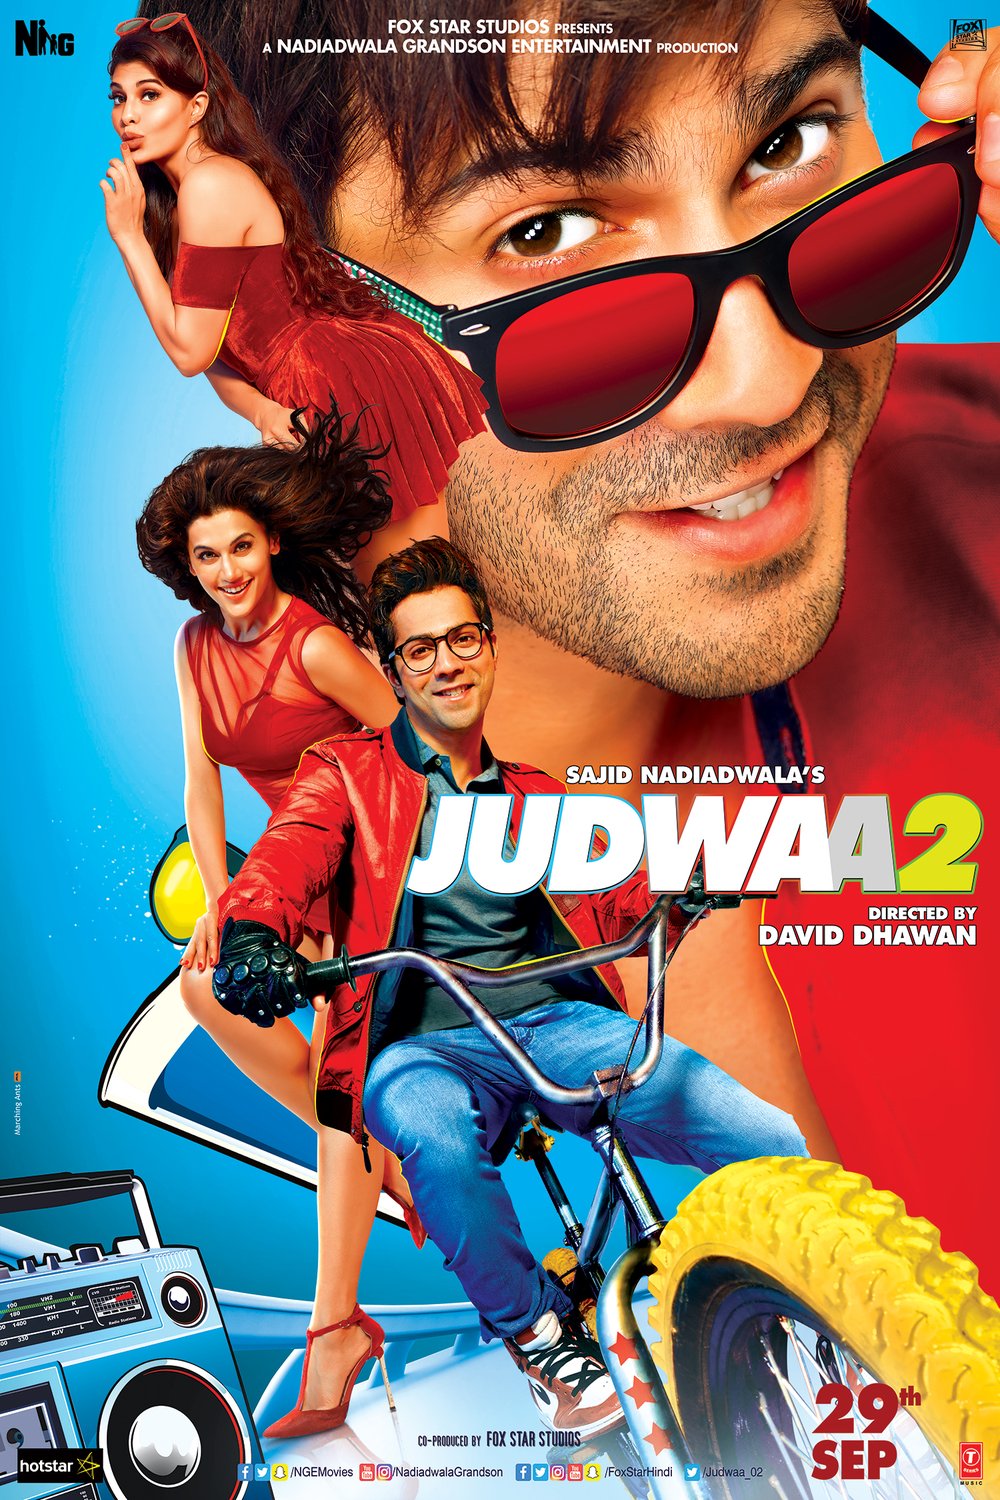 Poster of the movie Judwaa 2